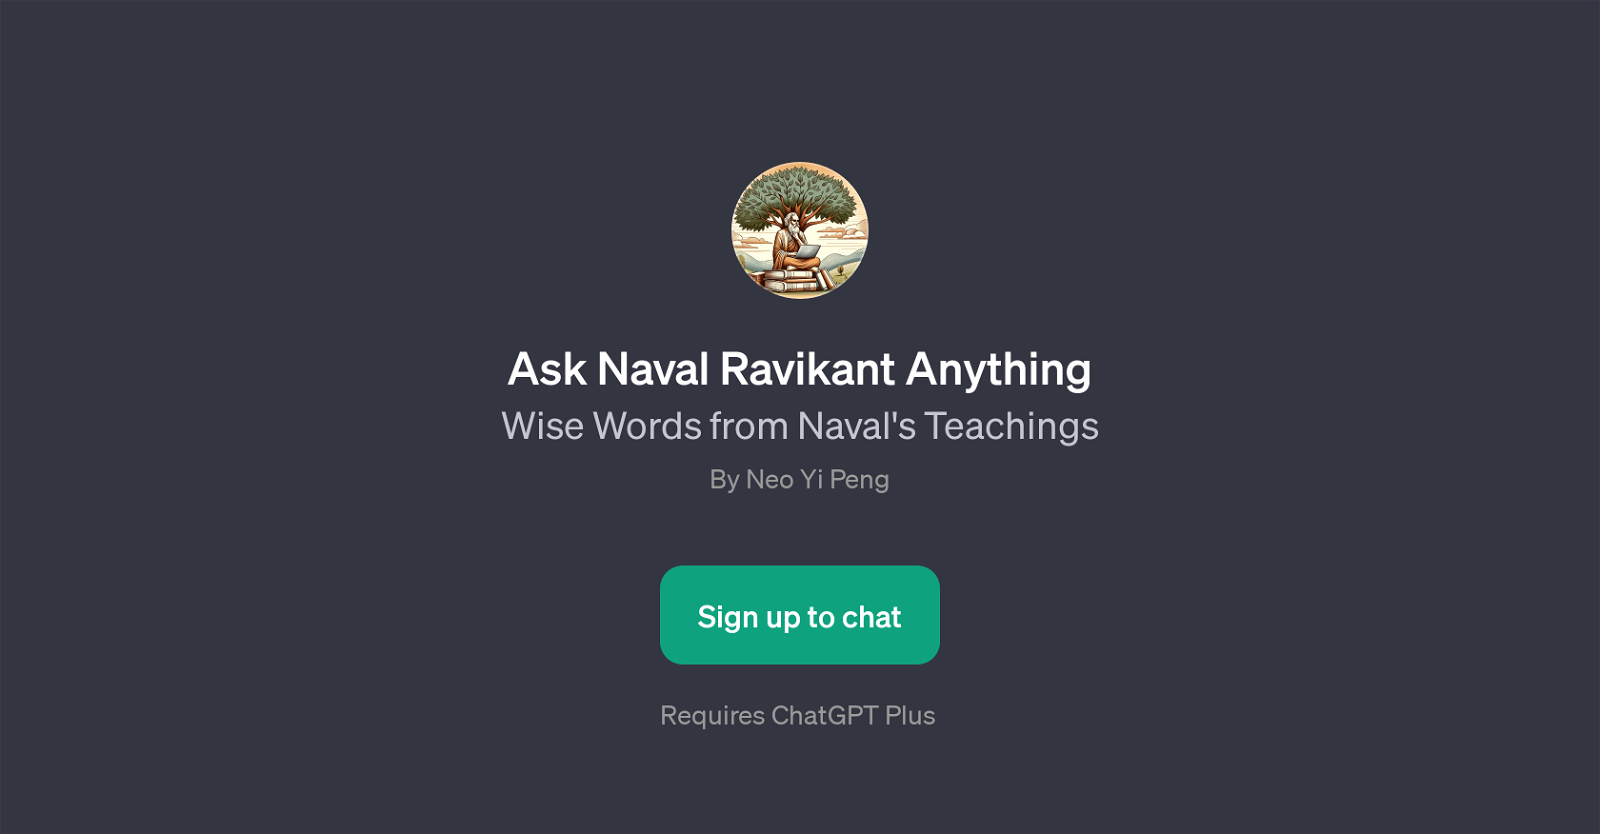 Ask Naval Ravikant Anything website